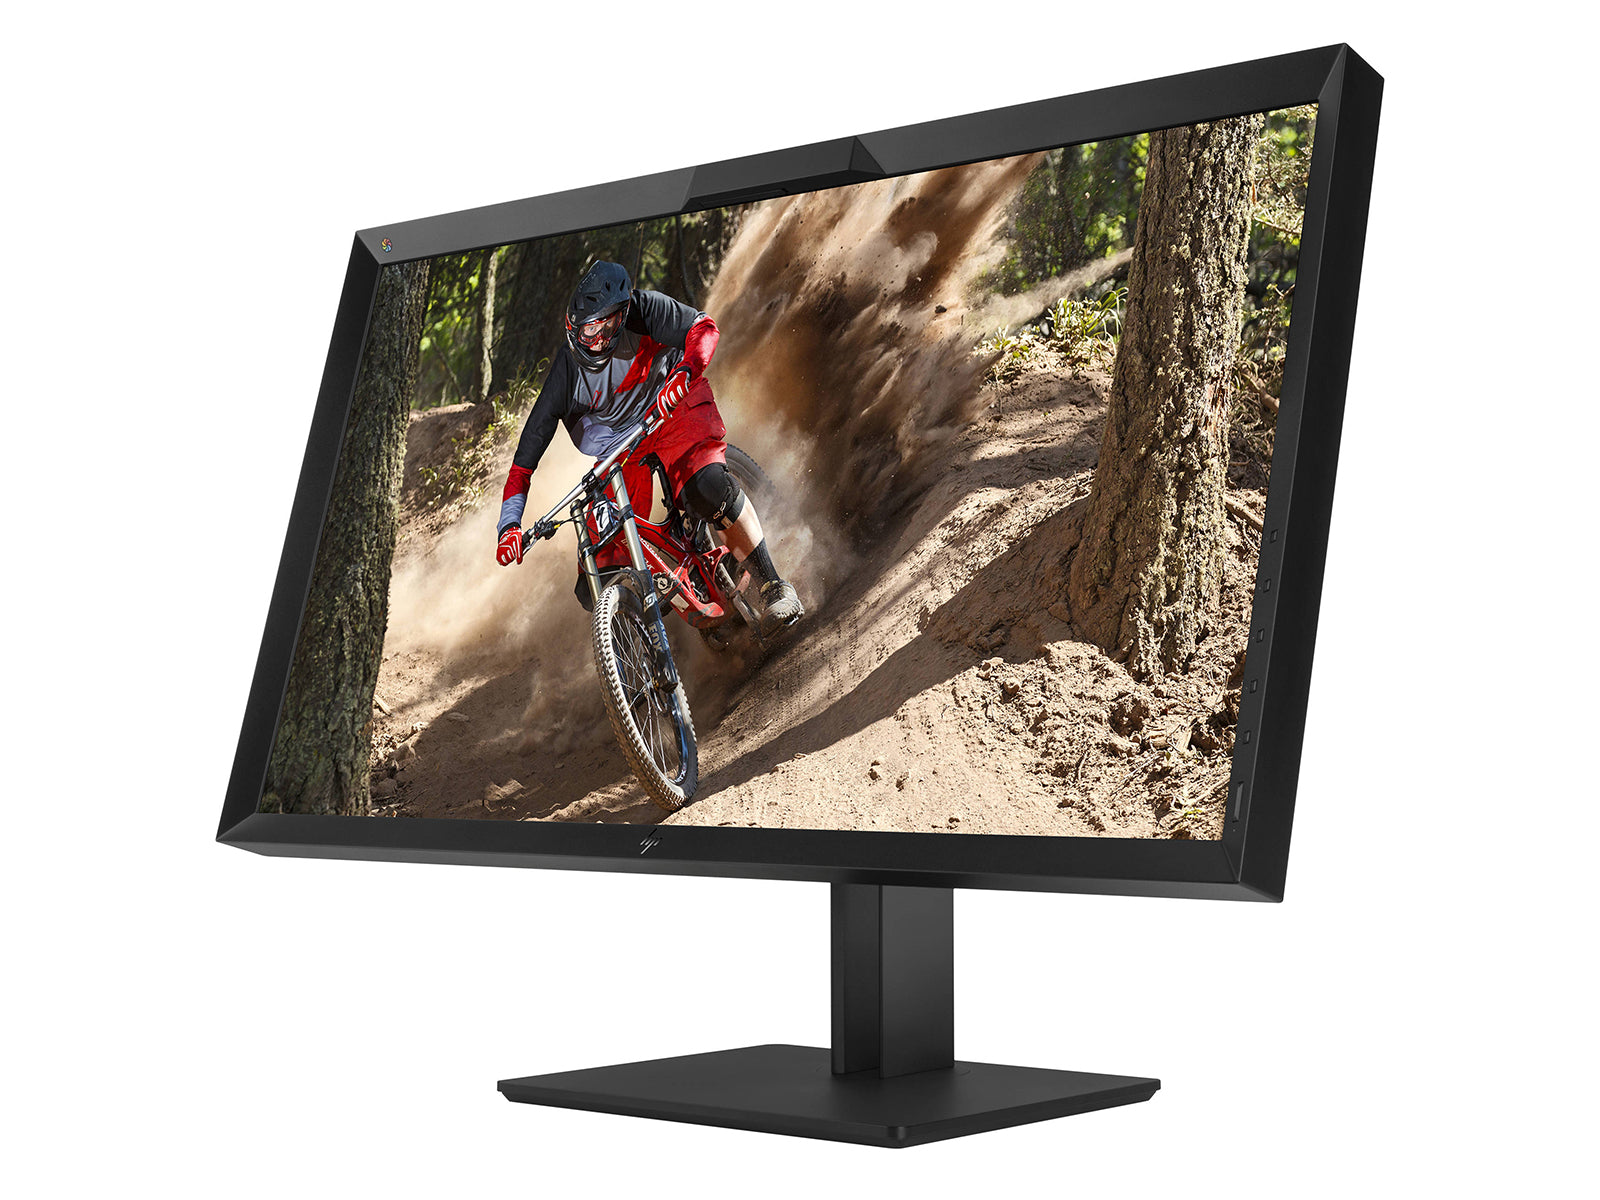 HP DreamColor Z31x 4K 31" Color LED Display Monitor (Z4Y82A8#ABA) Monitors.com 